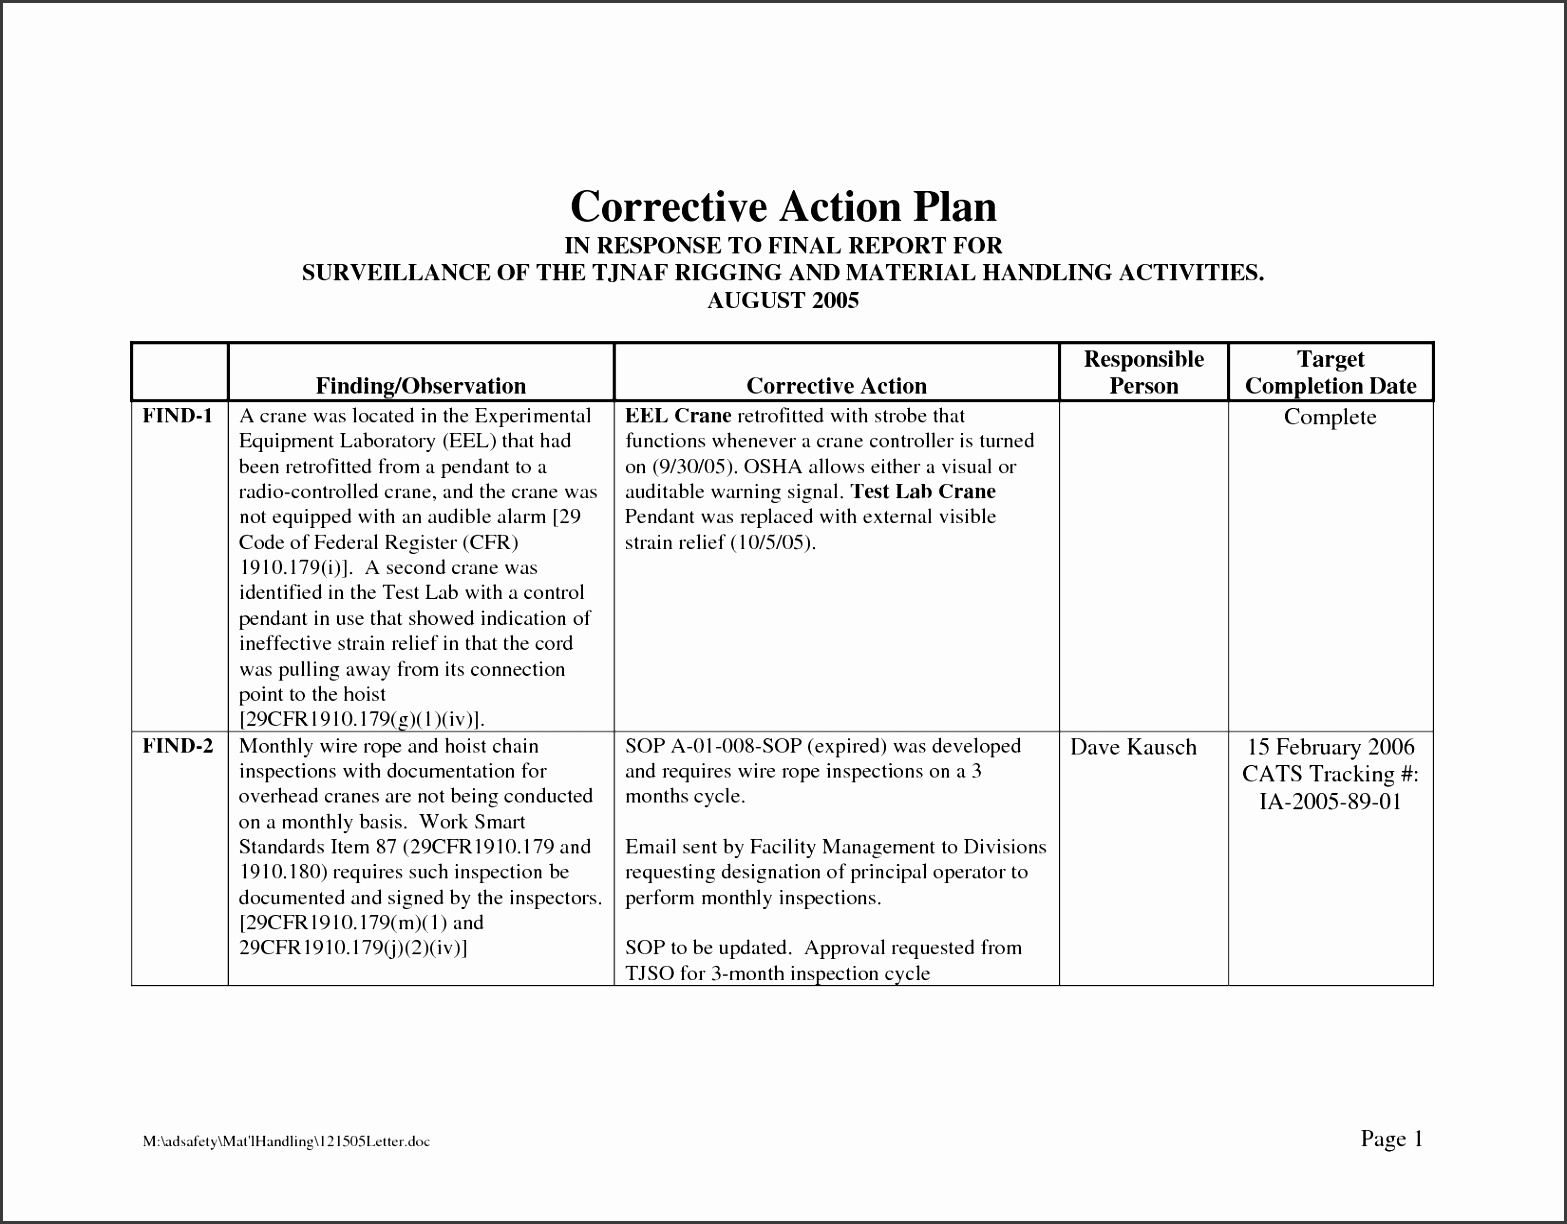 Free Action Plan Template Word Employee Corrective Action Form Free Action Plan Template Word 0206 020